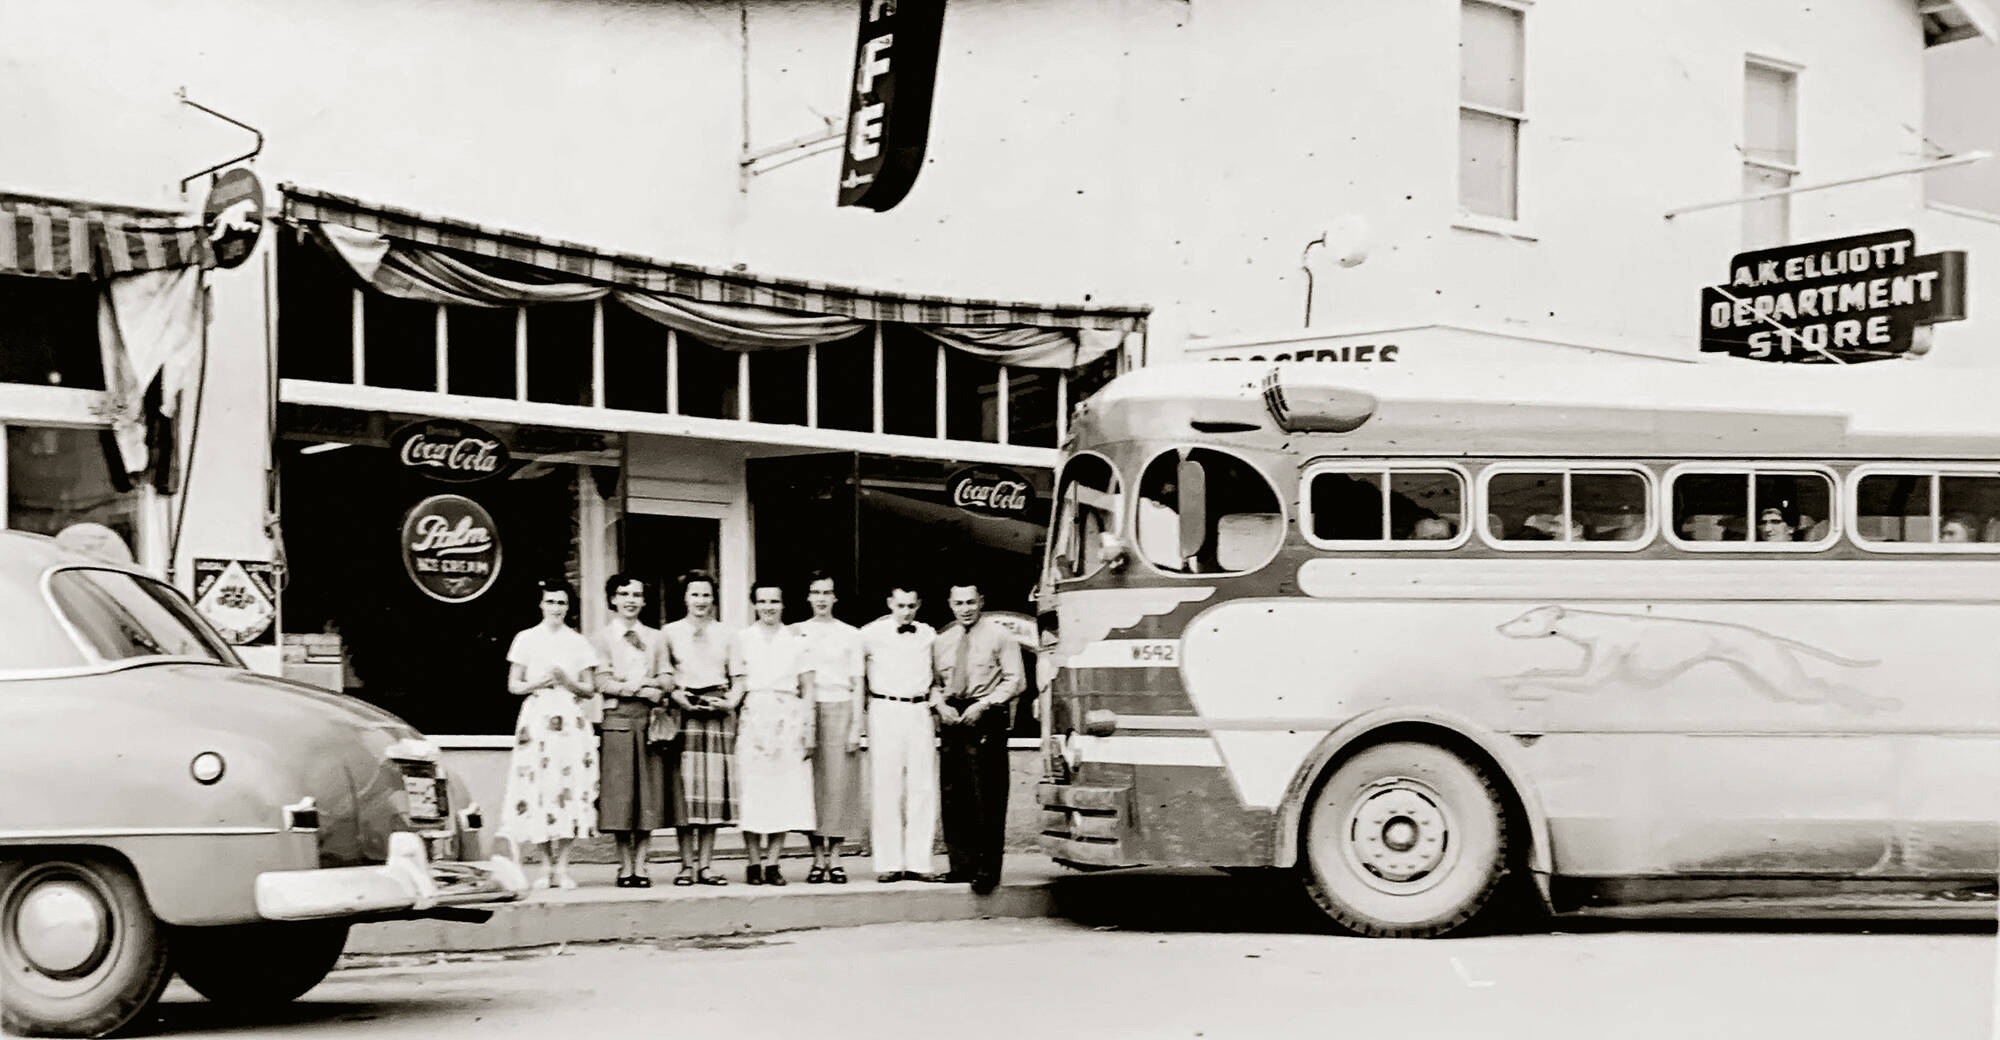 For many years, Greyhound buses, with their iconic dog logo, provided transportation to communities across Canada. Do you know when this bus service ceased operations in western Canada? (Photo courtesy of the Summerland Museum)